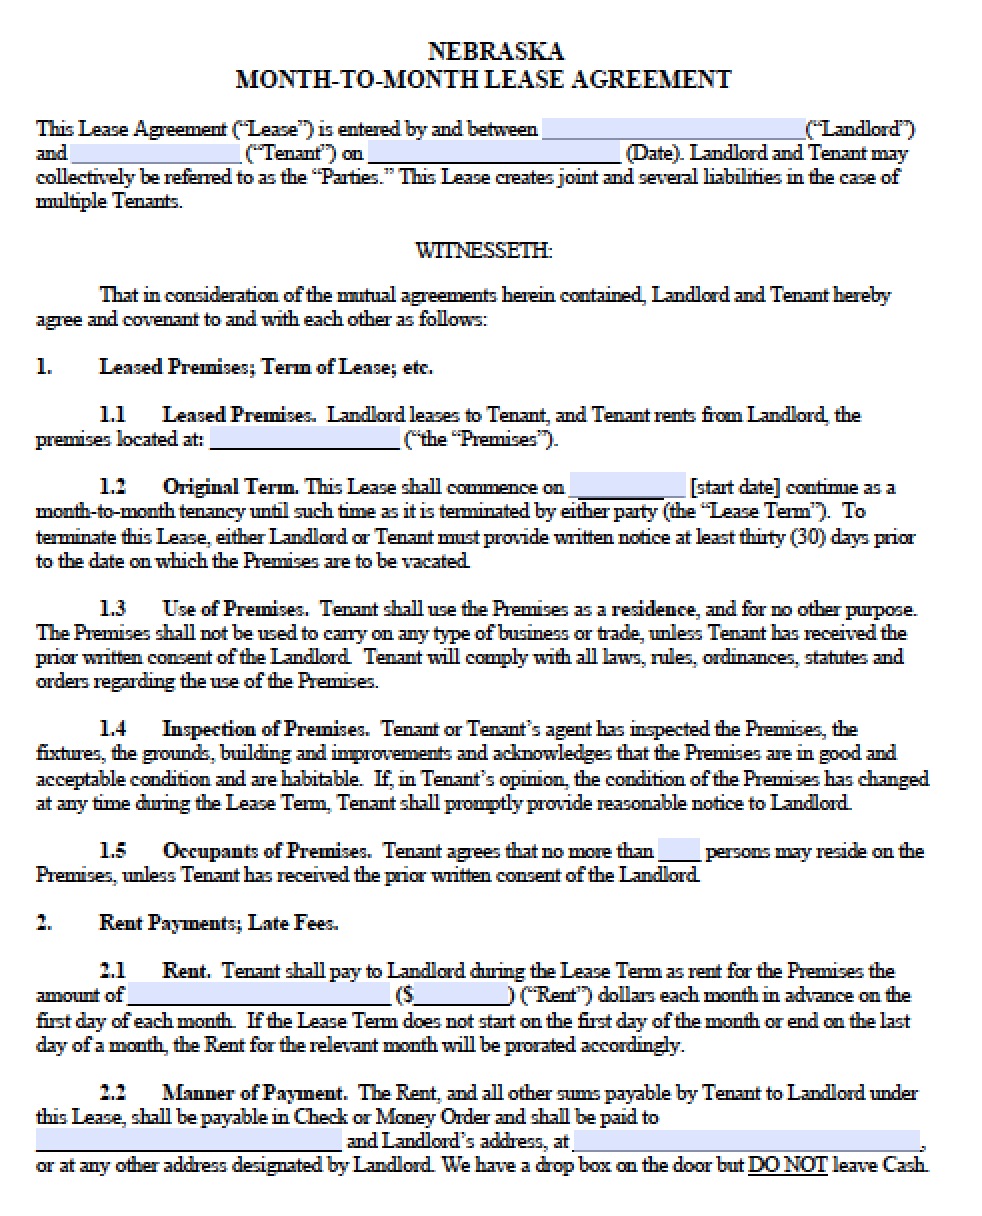 free nebraska month to month lease agreement template